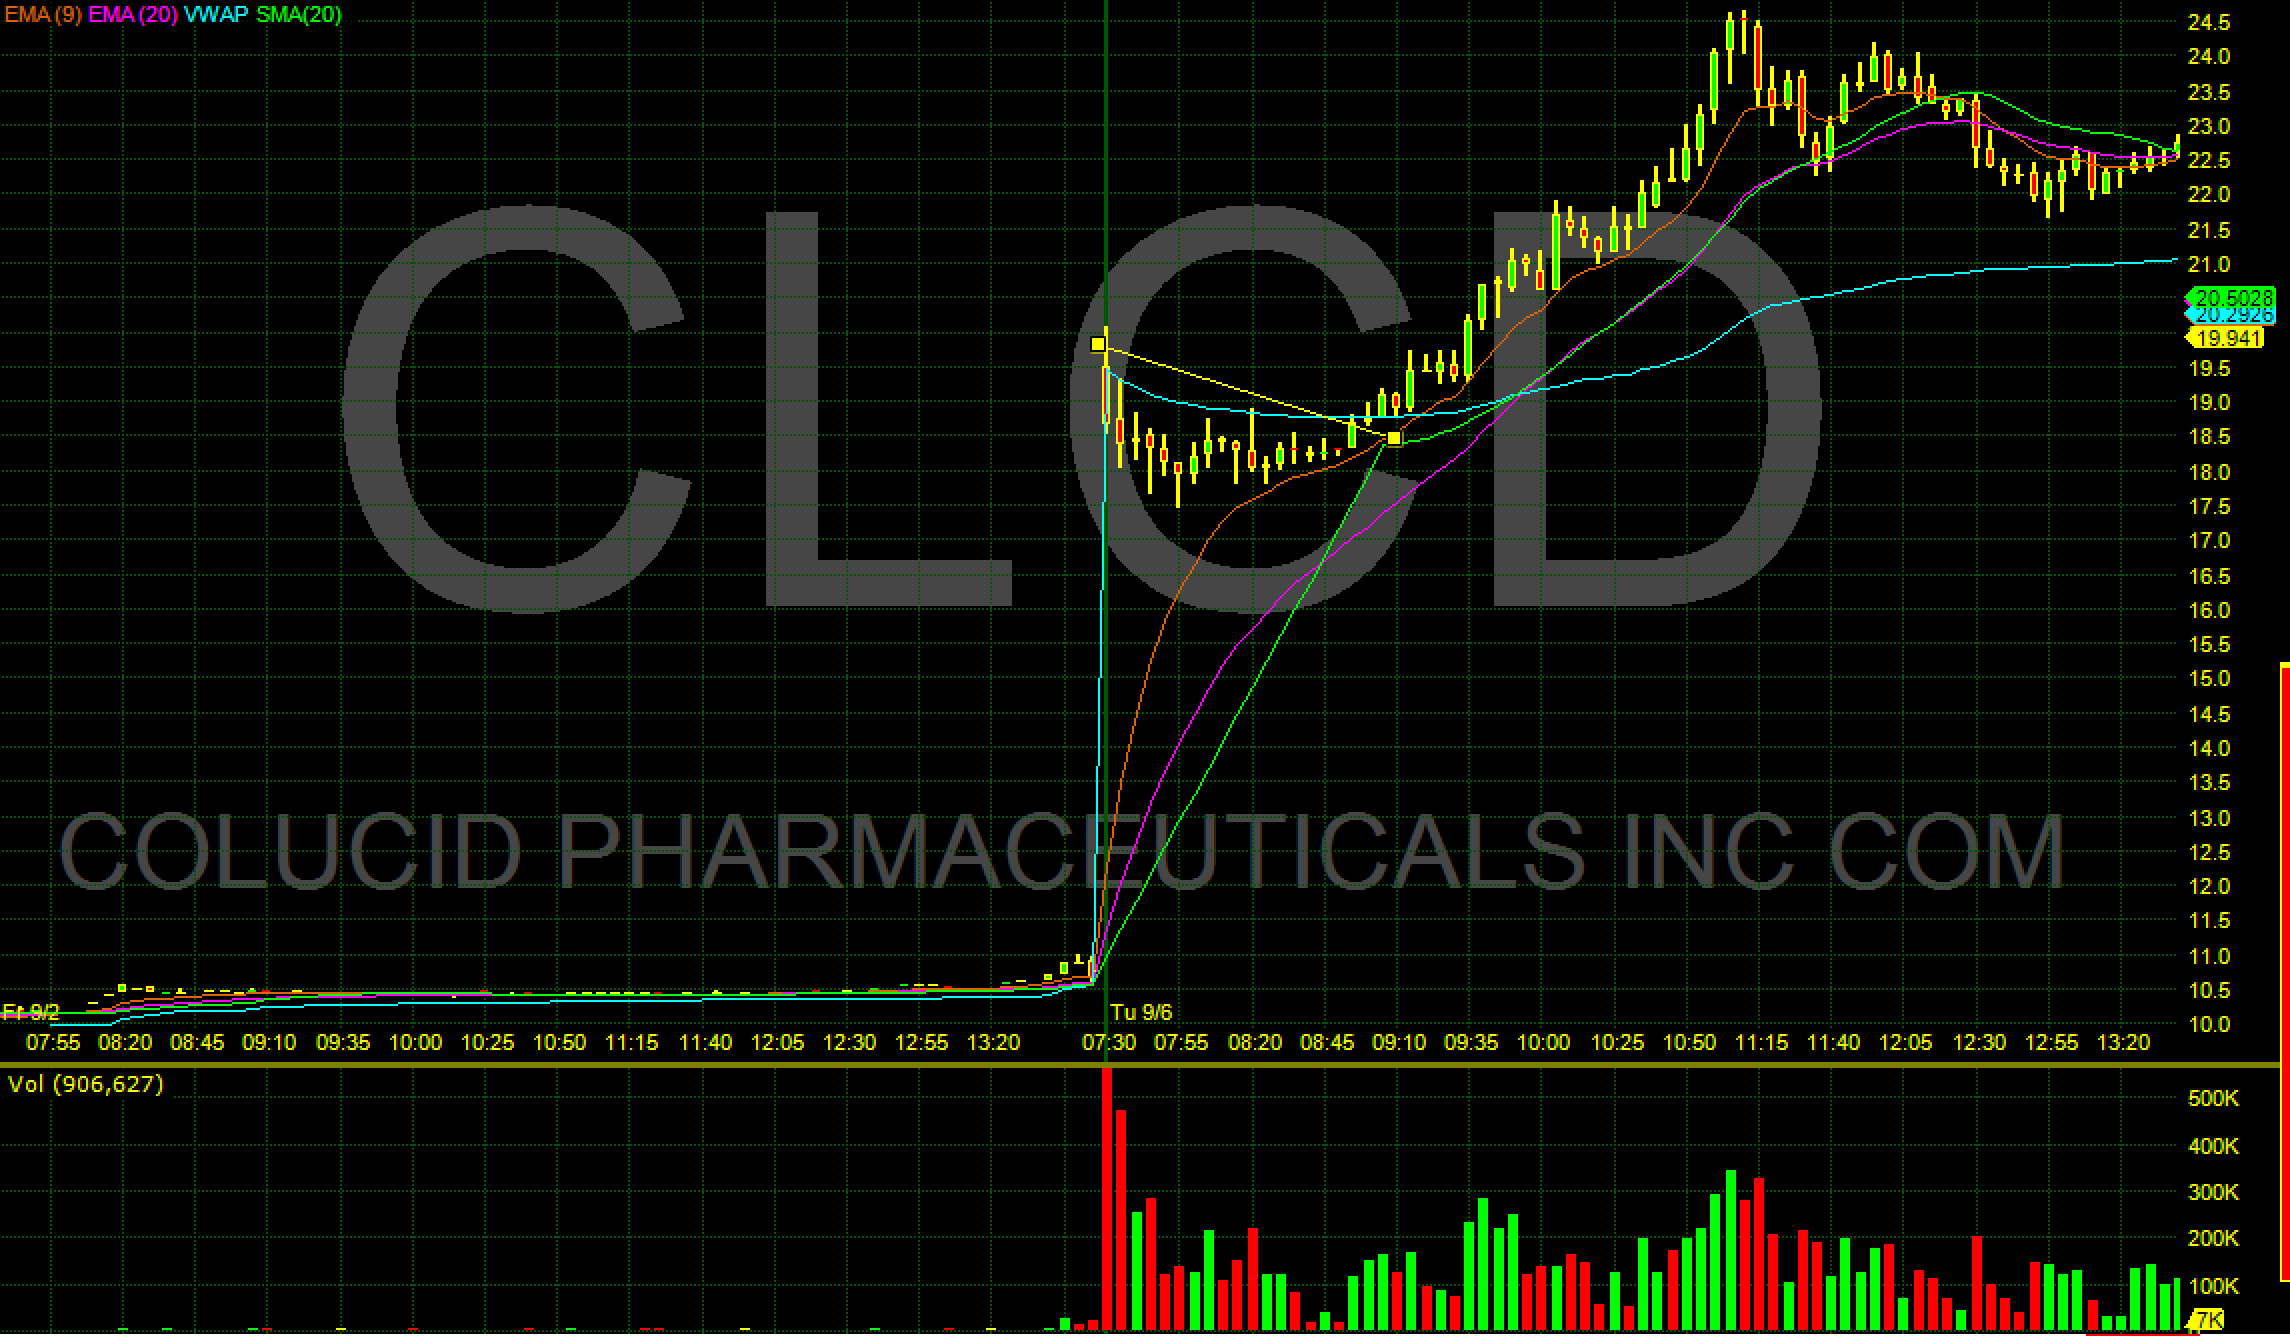 CLCD We had a nice bounce trade from 20 to 21.50.Watching for a bounce continuation setup between 21 and 19.80.